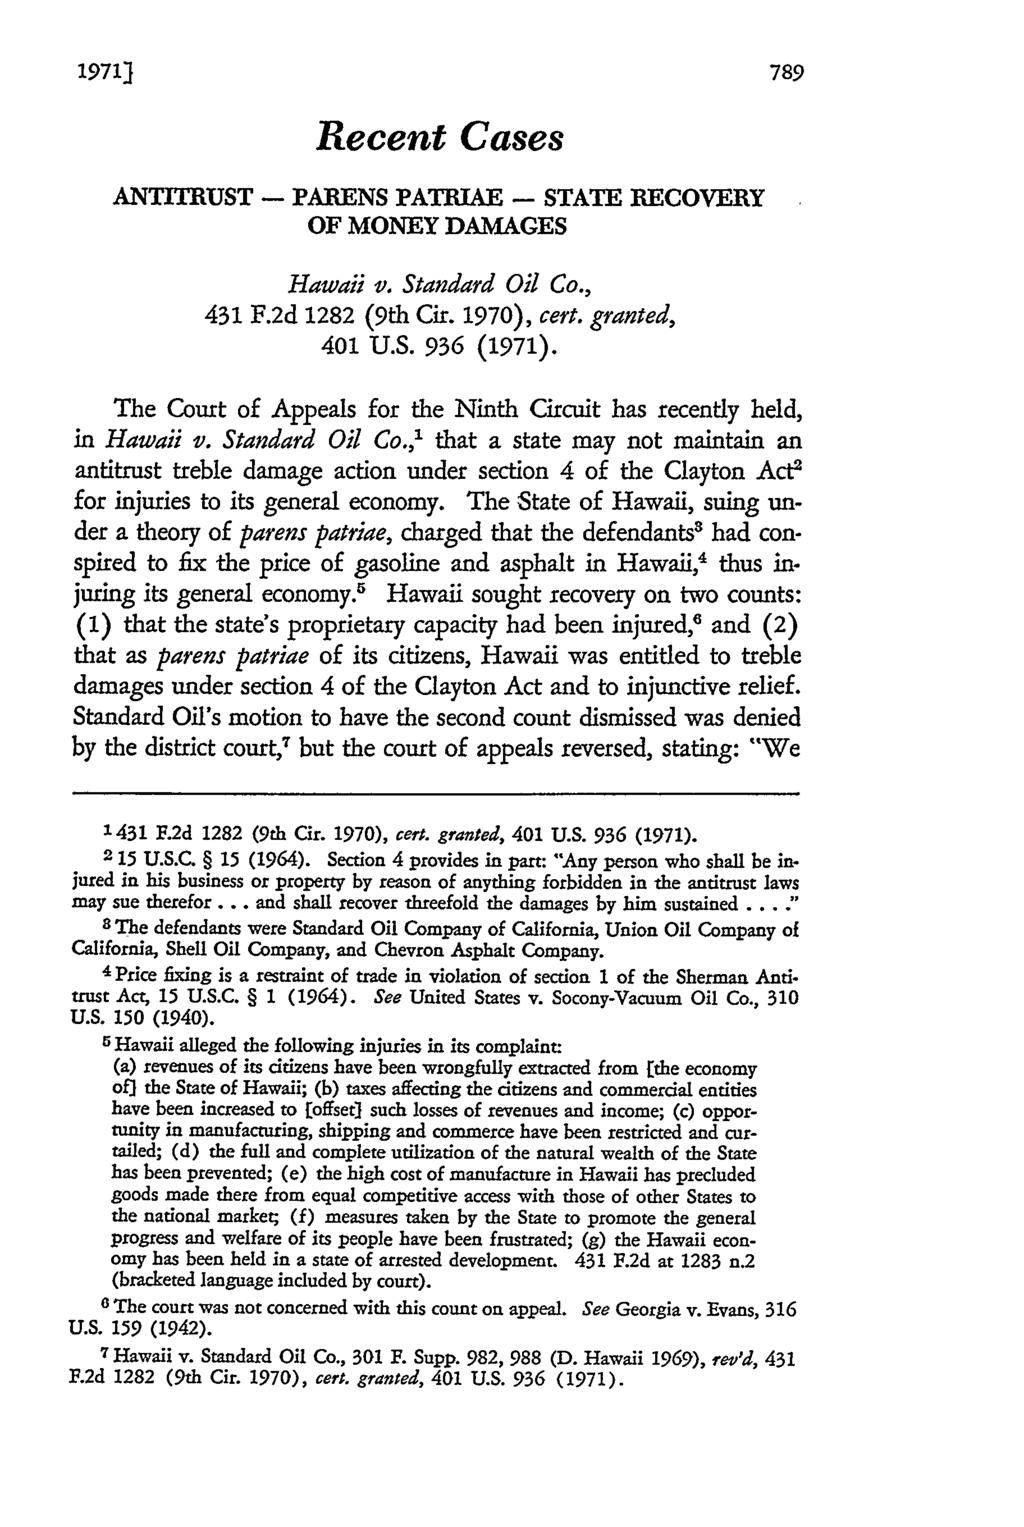 19711 Recent Cases ANTITRUST - PARENS PATRIAE - STATE RECOVERY OF MONEY DAMAGES Hawaii v. Standard Oil Co., 431 F.2d 1282 (9th Cir. 1970), cert. granted, 401 U.S. 936 (1971).